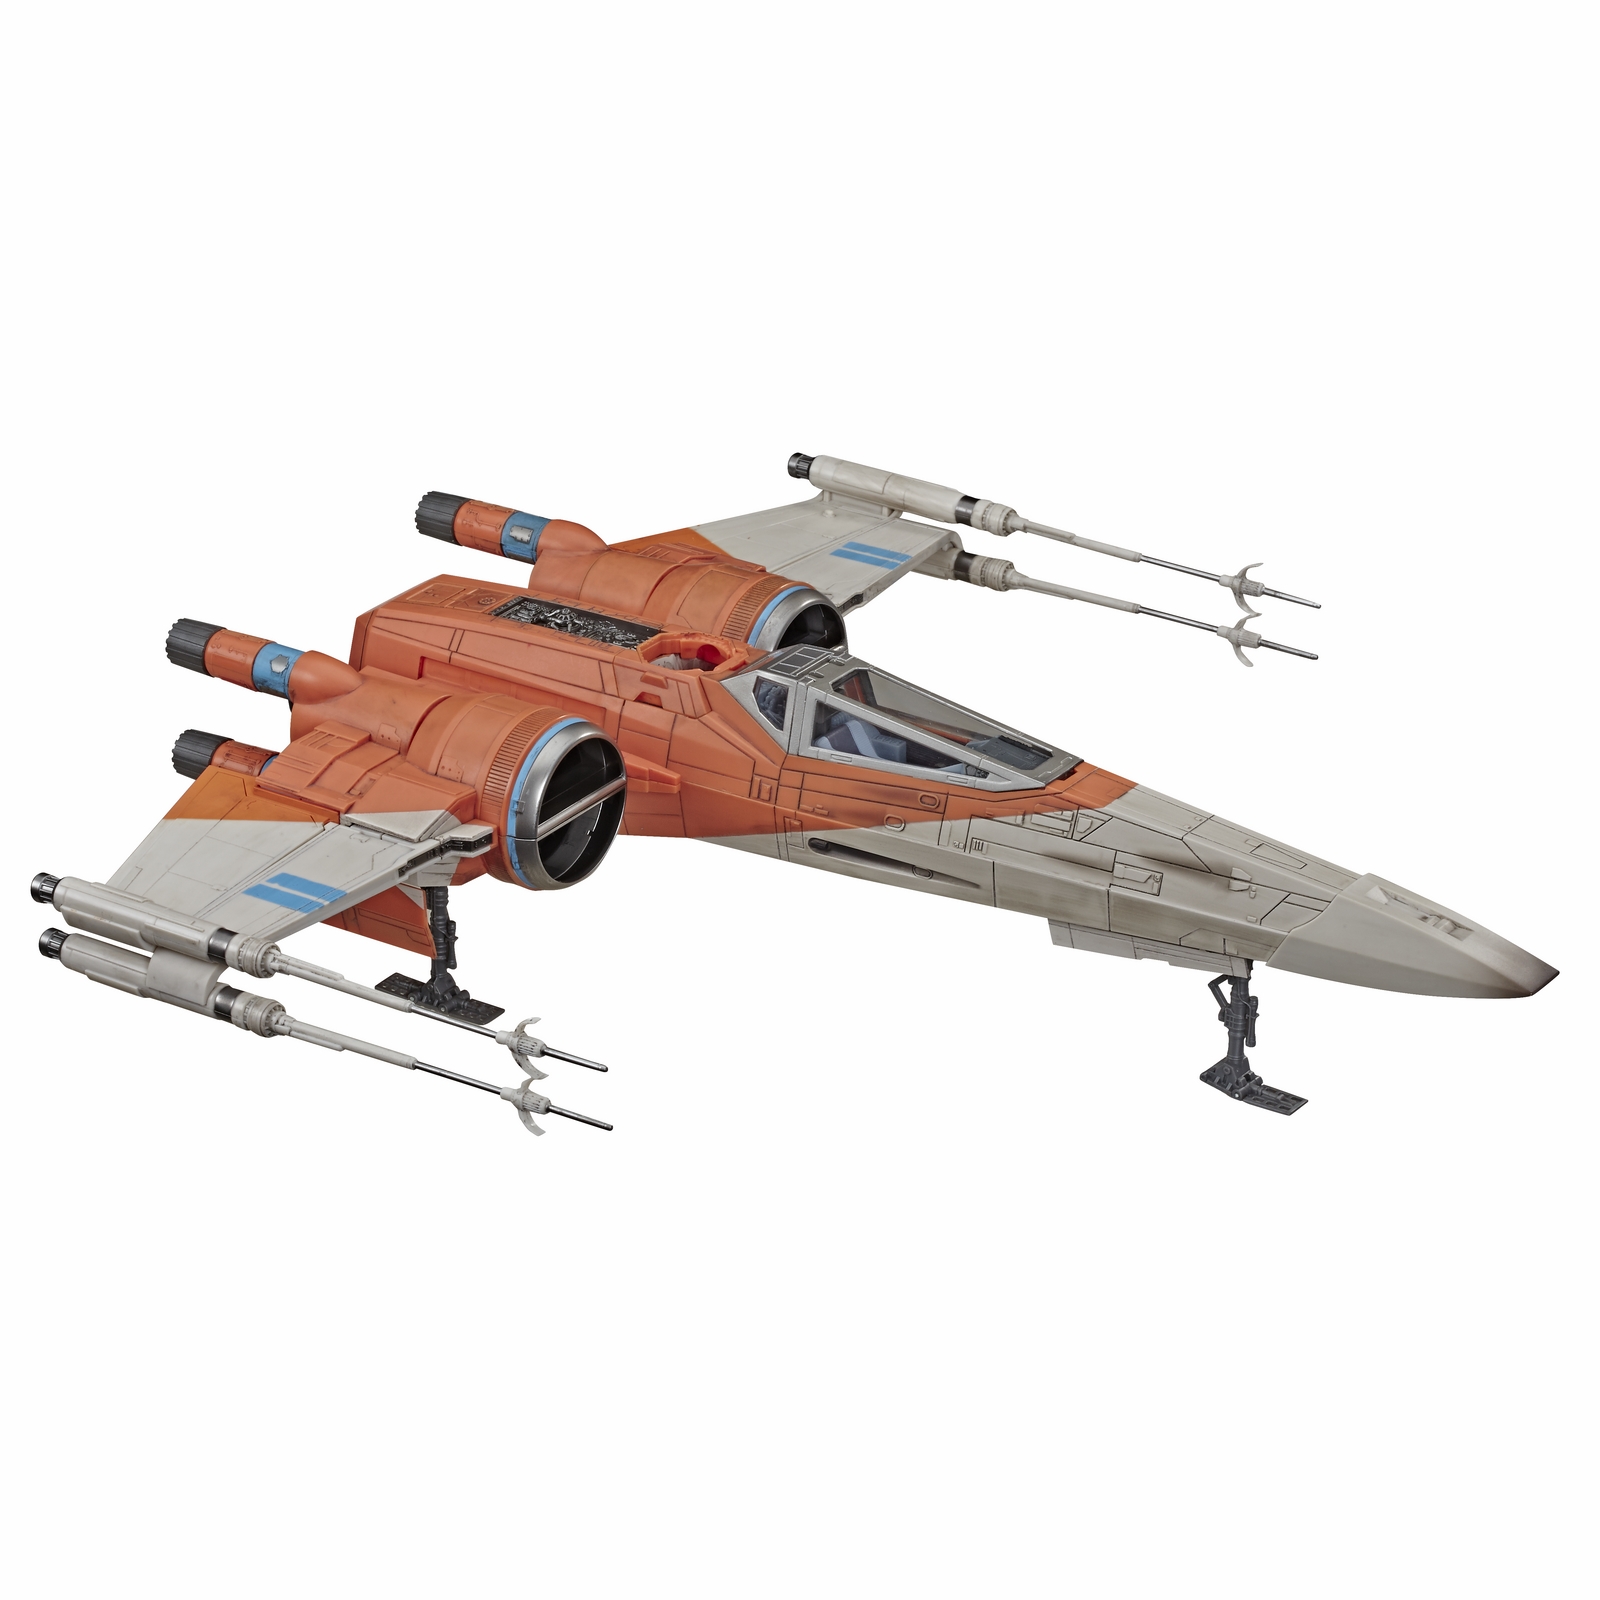 STAR%20WARS%20THE%20VINTAGE%20COLLECTION%20POE%20DAMERON%E2%80%99S%20X-WING%20FIGHTER%20Vehicle%20-%20oop.jpg